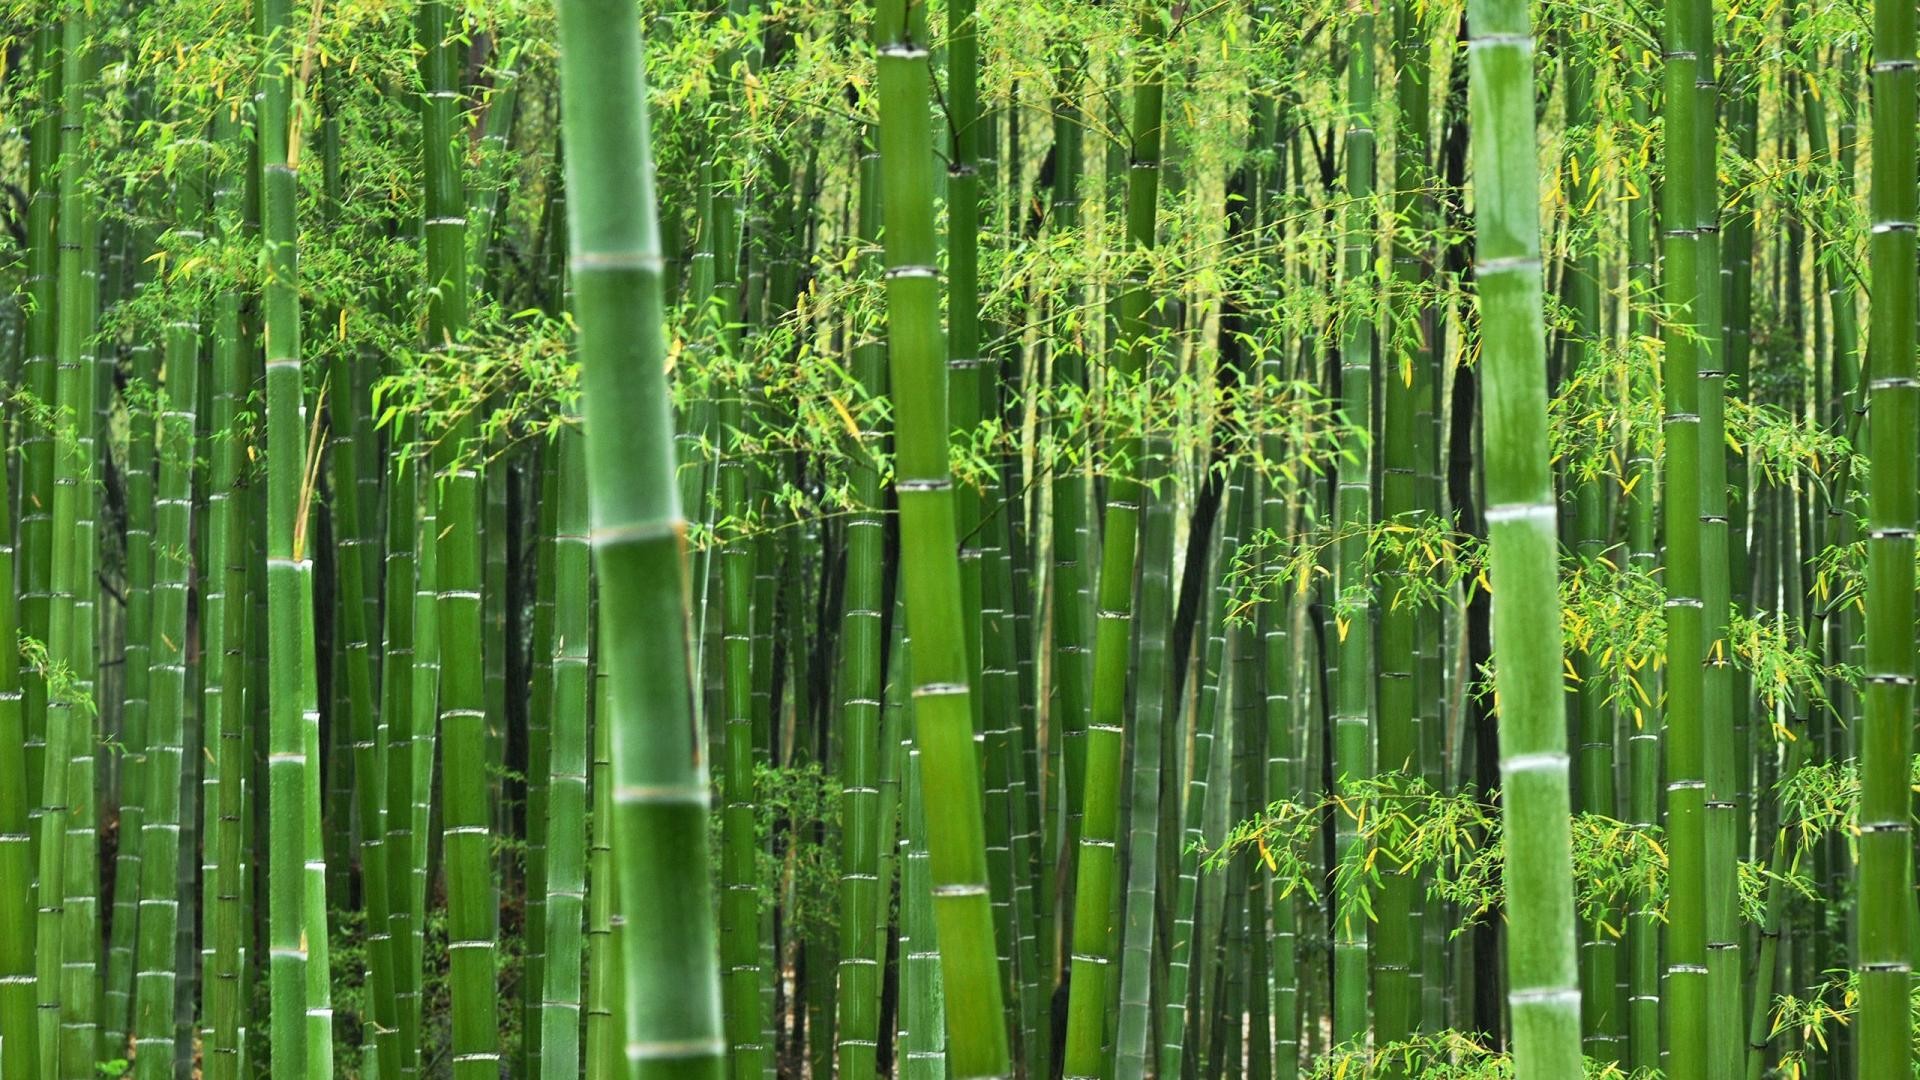 Free Hd Bamboo Wallpapers Download 
 Data Src Download - Bamboo Wallpaper Hd - HD Wallpaper 